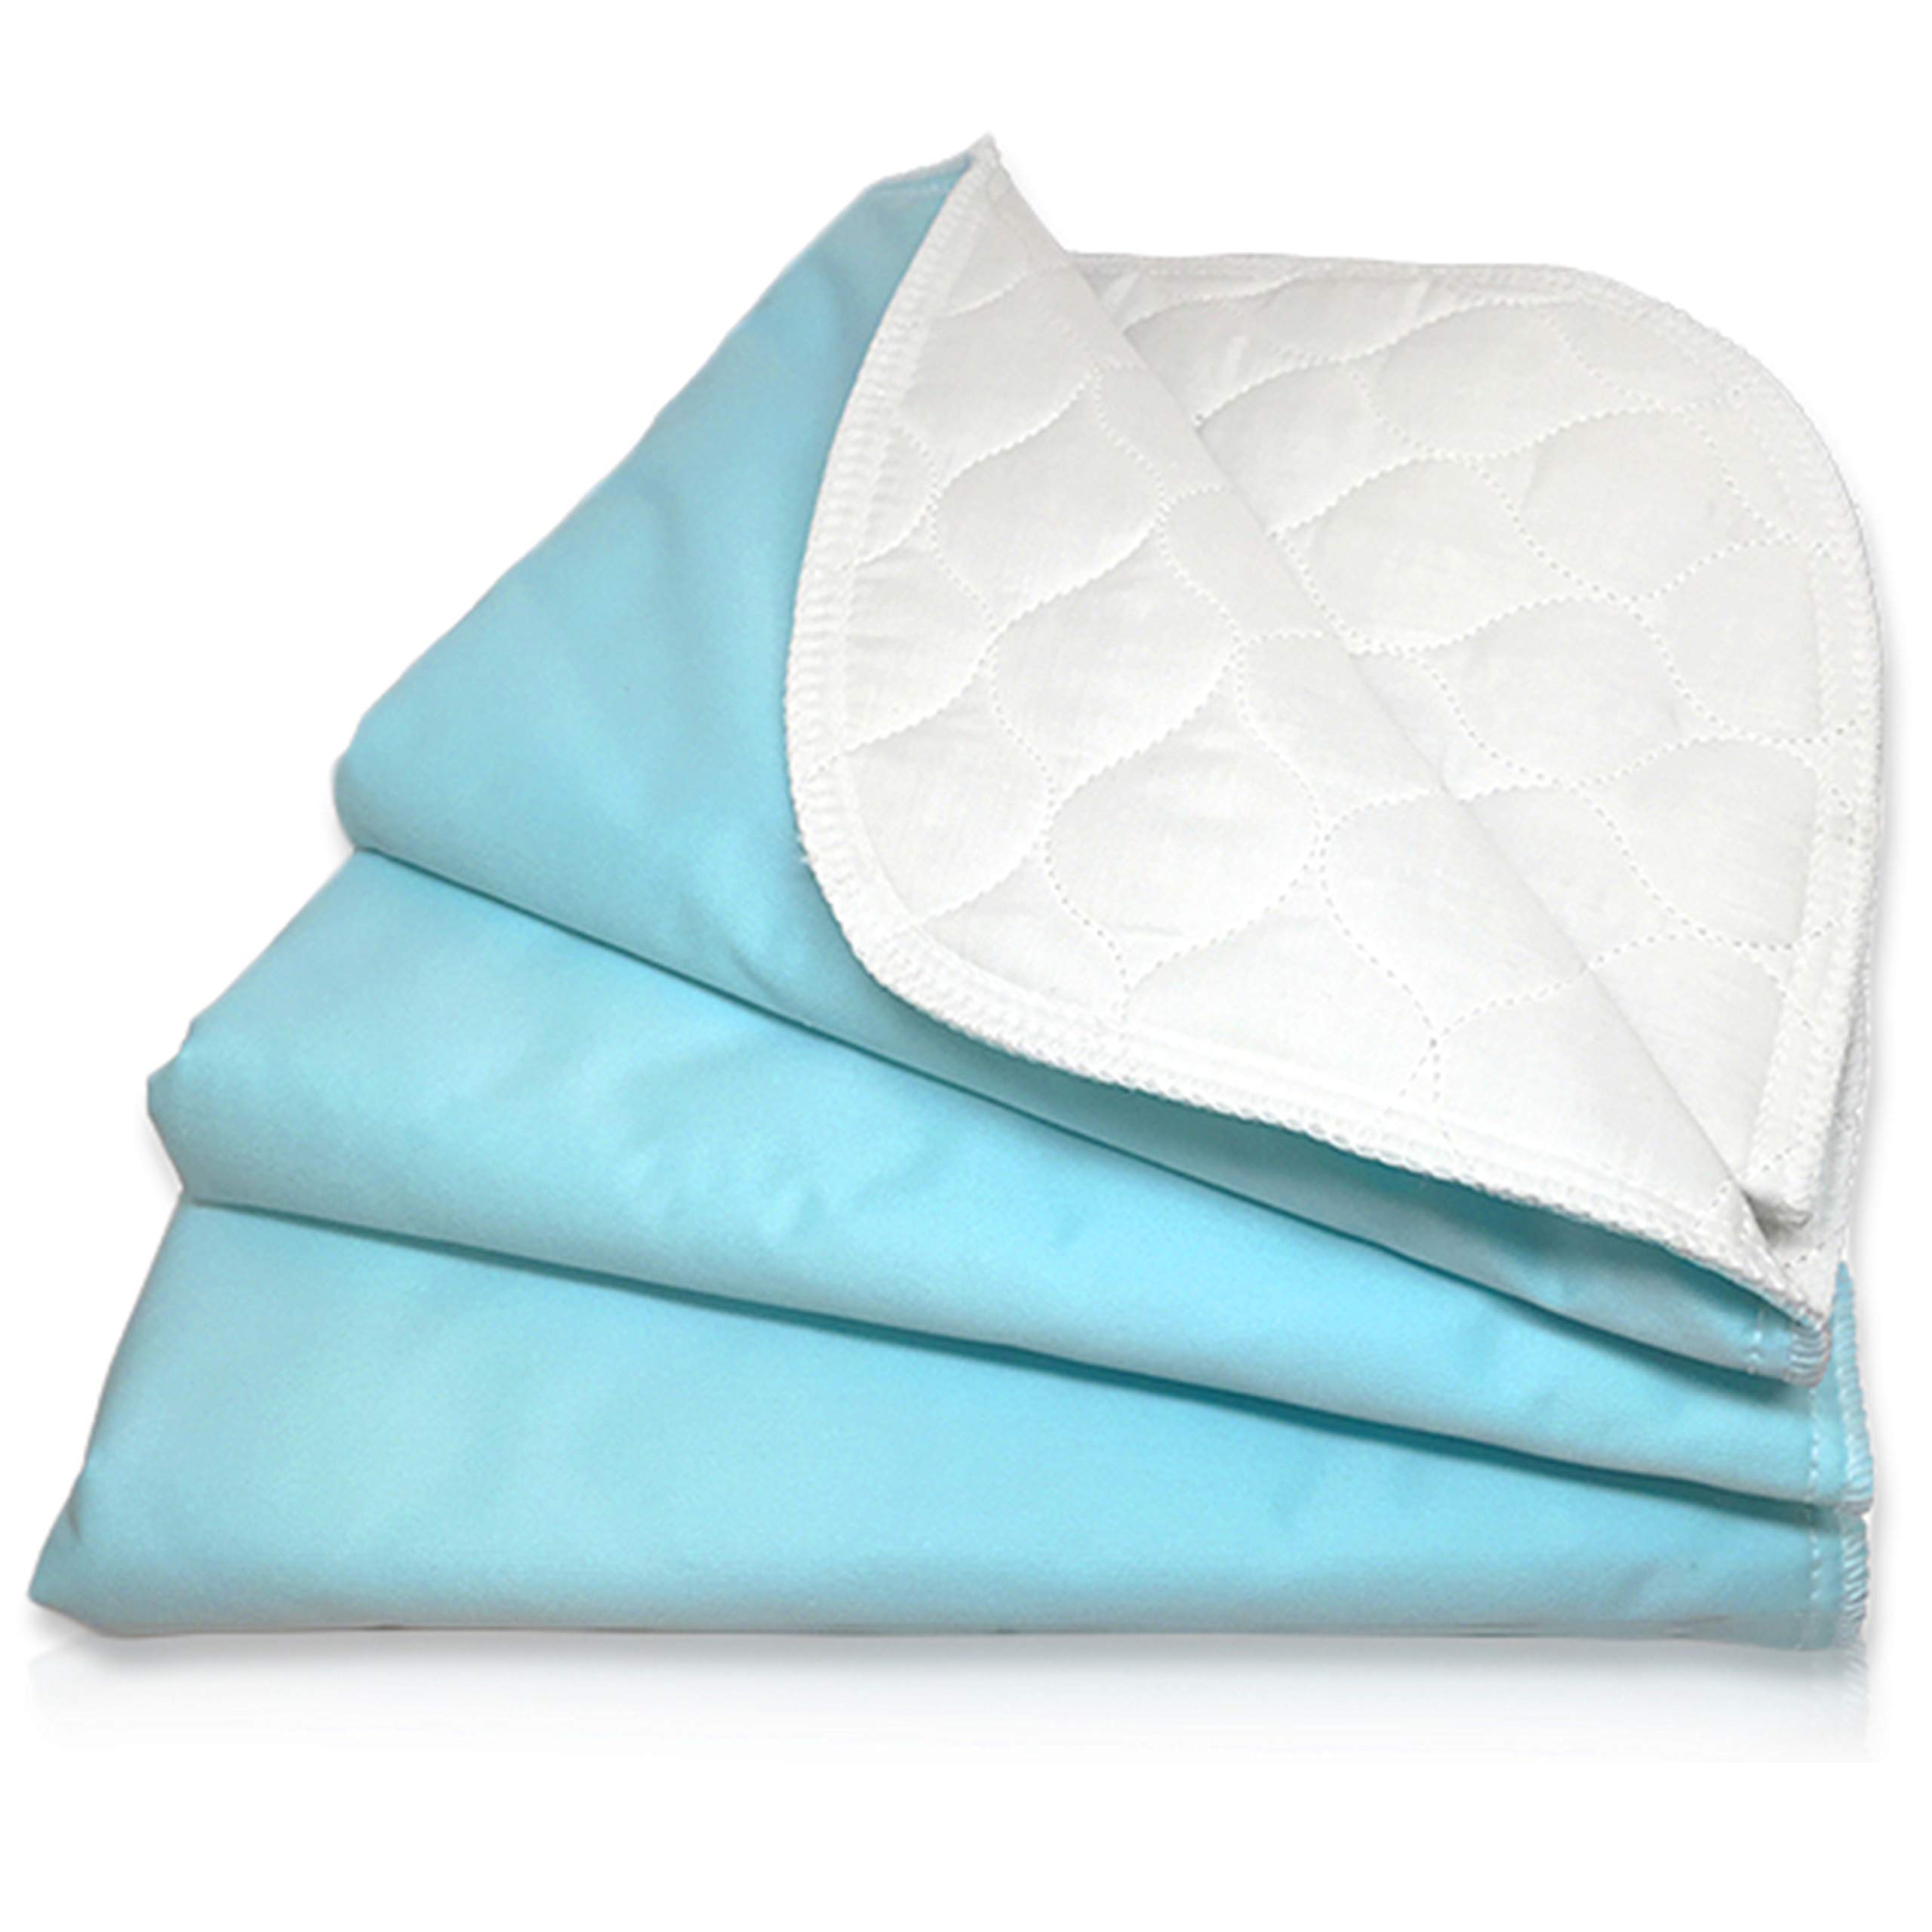 RMS Ultra Soft 4-Layer Washable and Reusable Incontinence Bed Pad -  Waterproof Bed Pads, 18X24 (3 Pack)